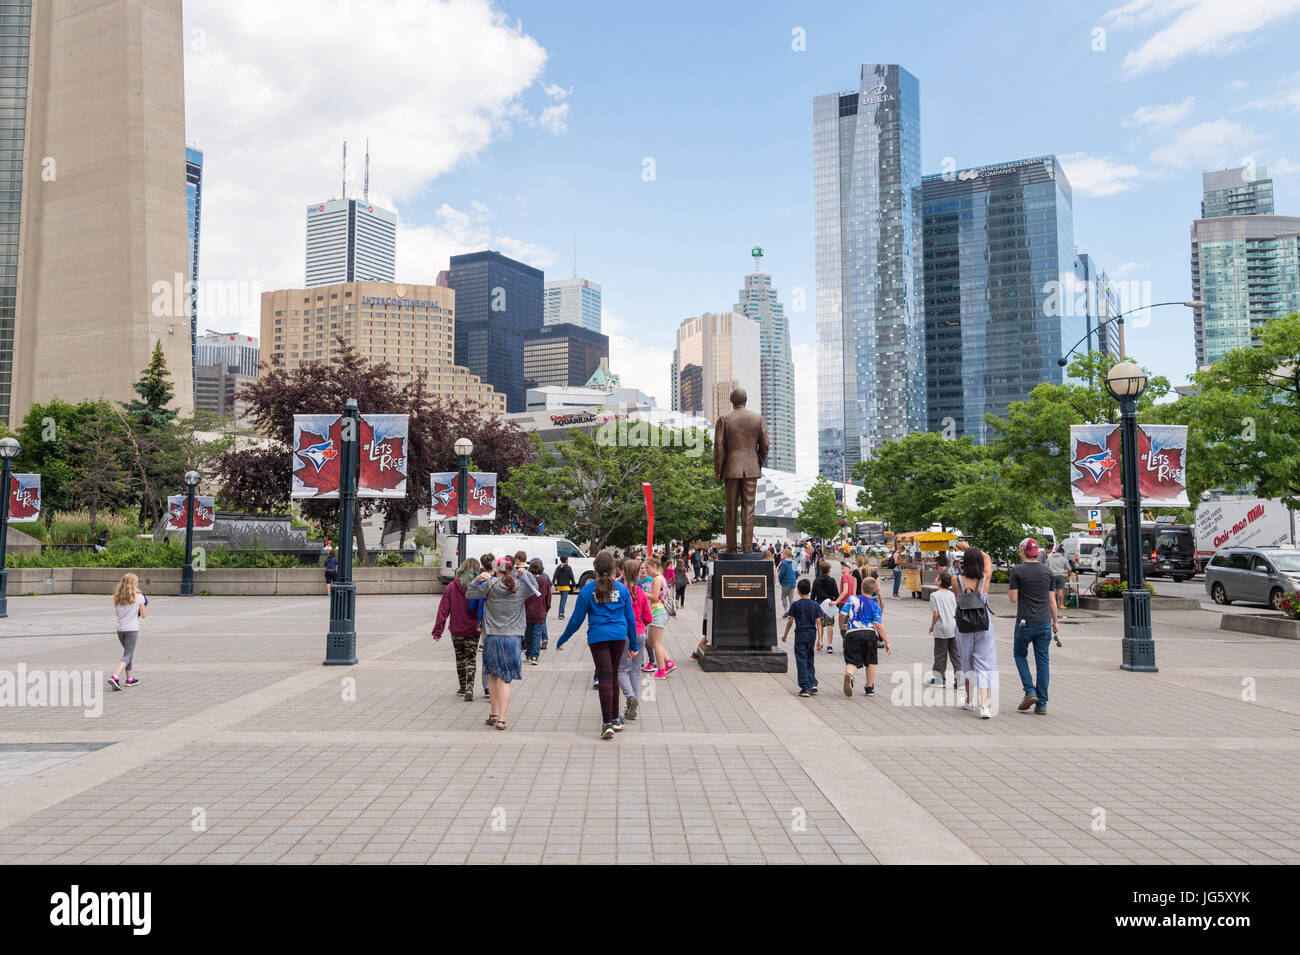 Toronto, Canada - 26 June 2017: People walking on Bremner Blvd in Downtown Toronto, with Toronto Cityscape in the background Stock Photo